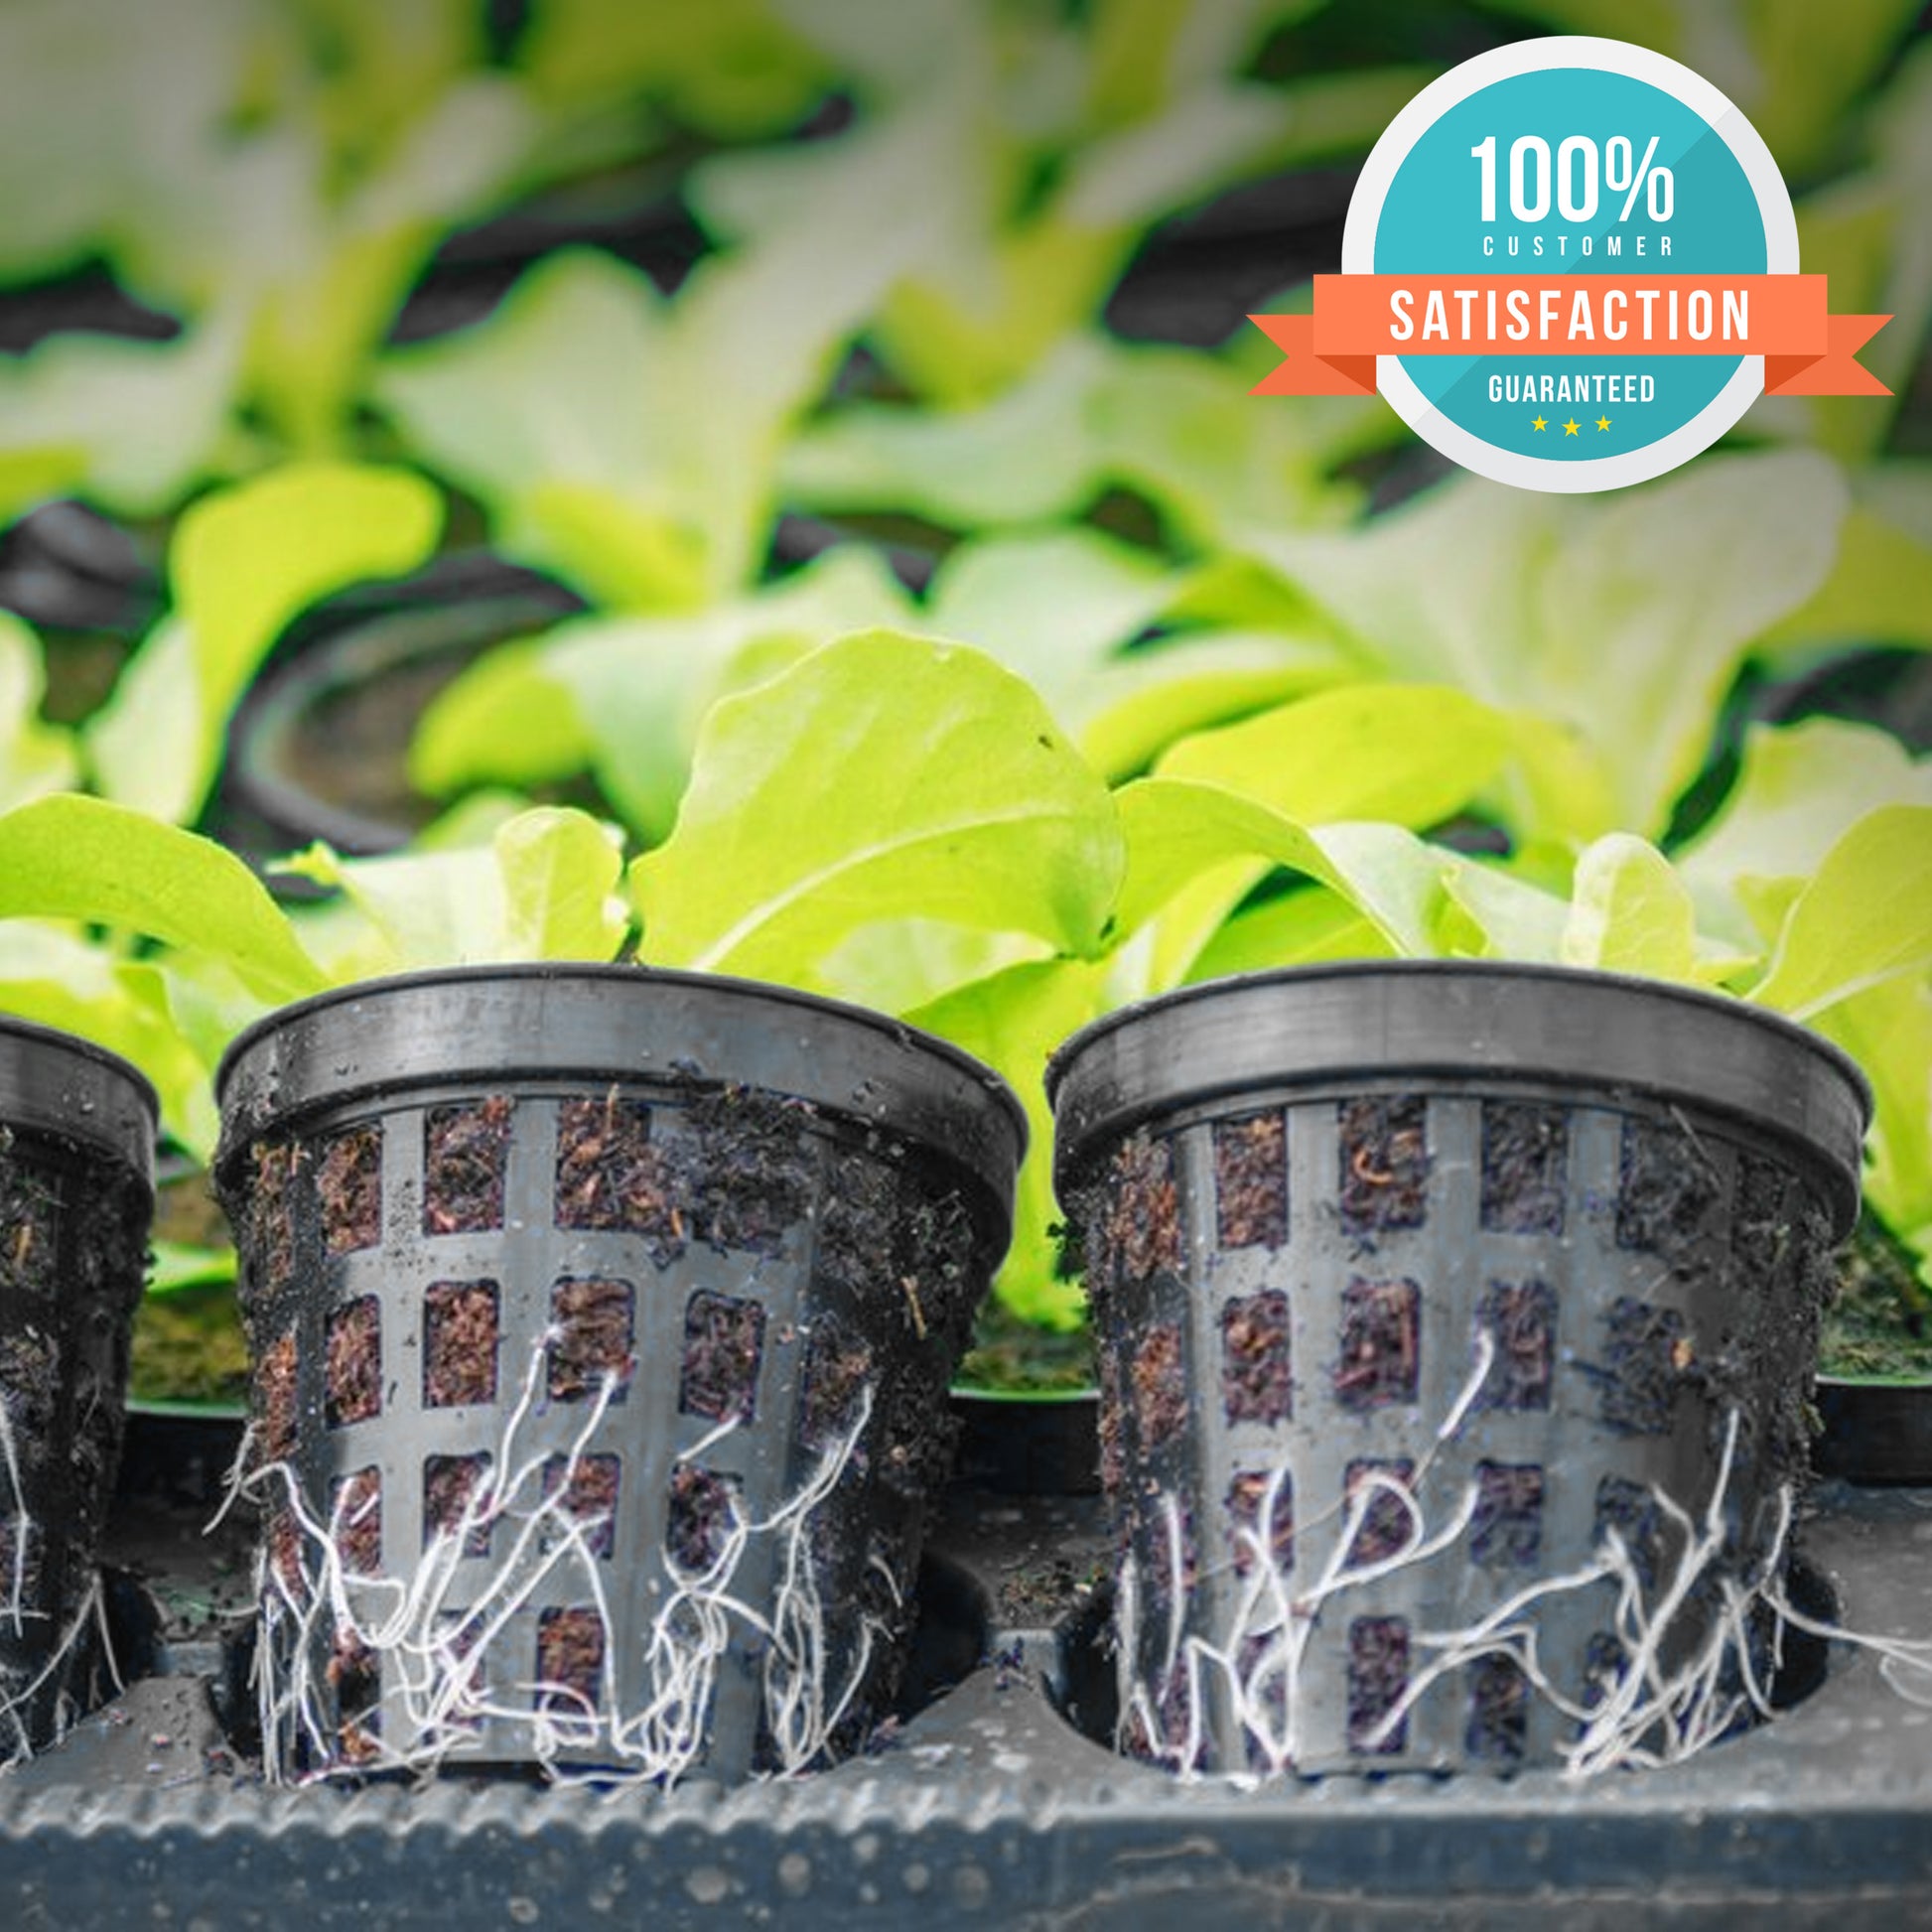 Hydro-Aero Net Pots Set - 100 Pieces of 2 inch Pots for Vertical Gardening - Kool Products